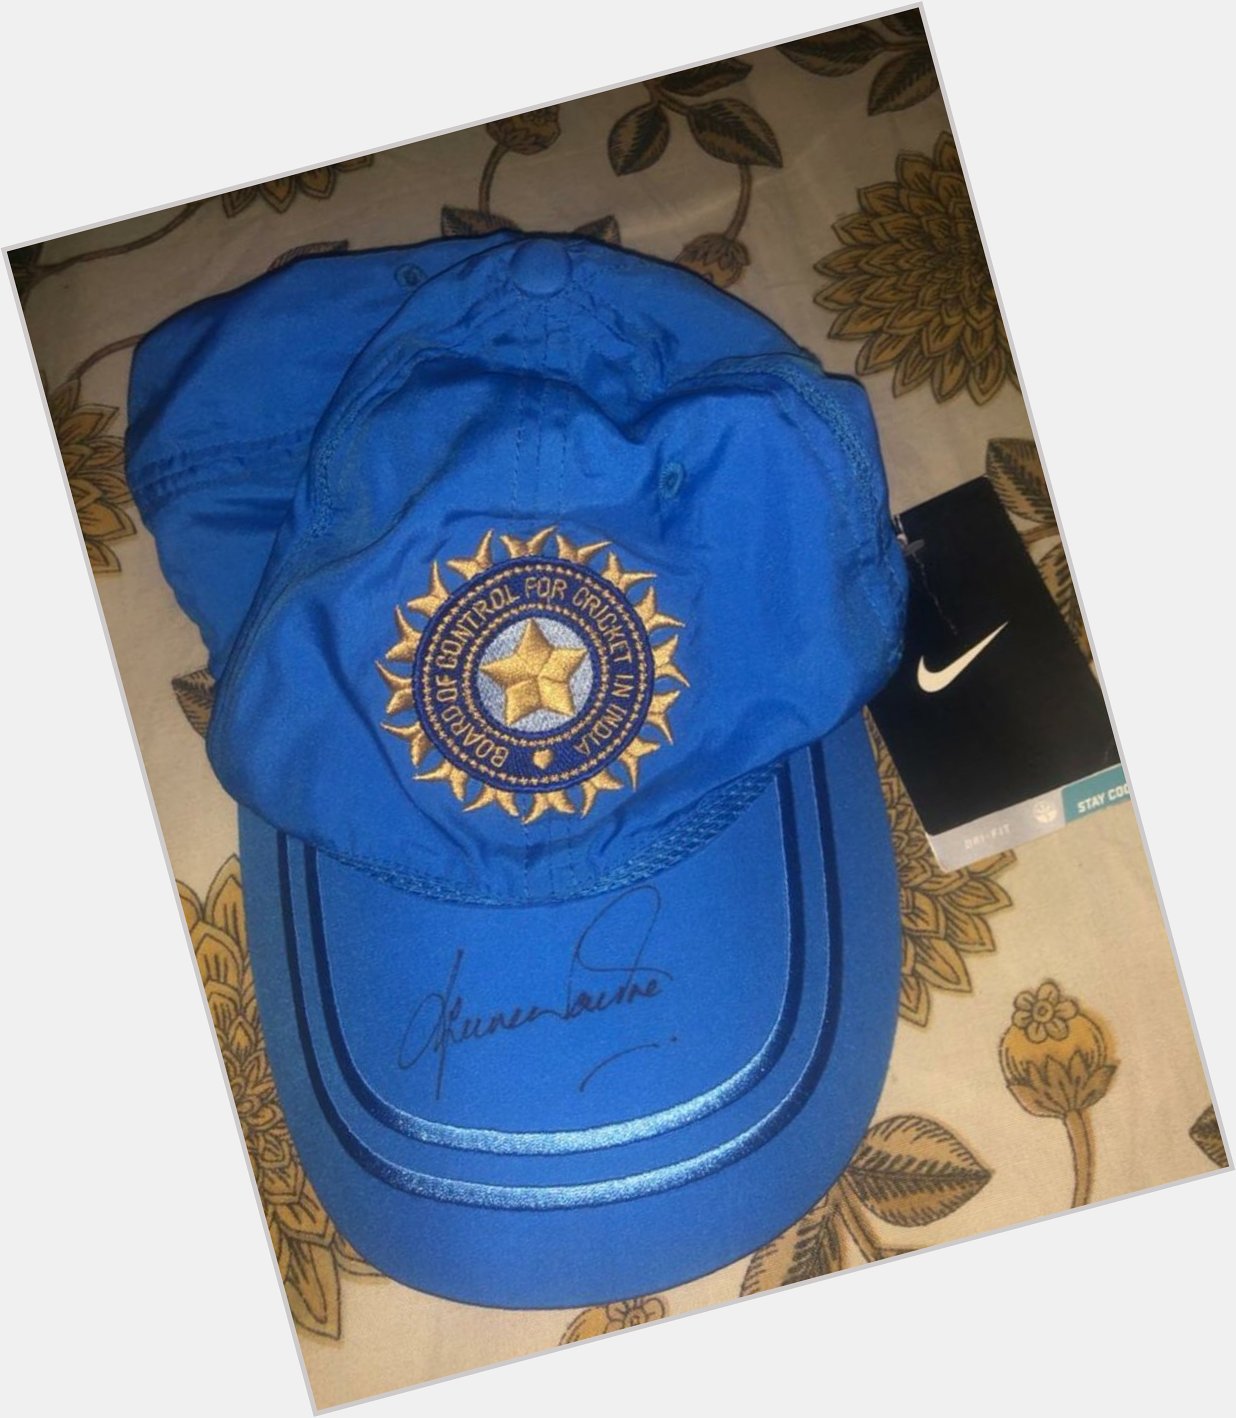 Lucky to get this India cap autographed by none other than SHANE WARNE       Happy Birthday Warnie... 